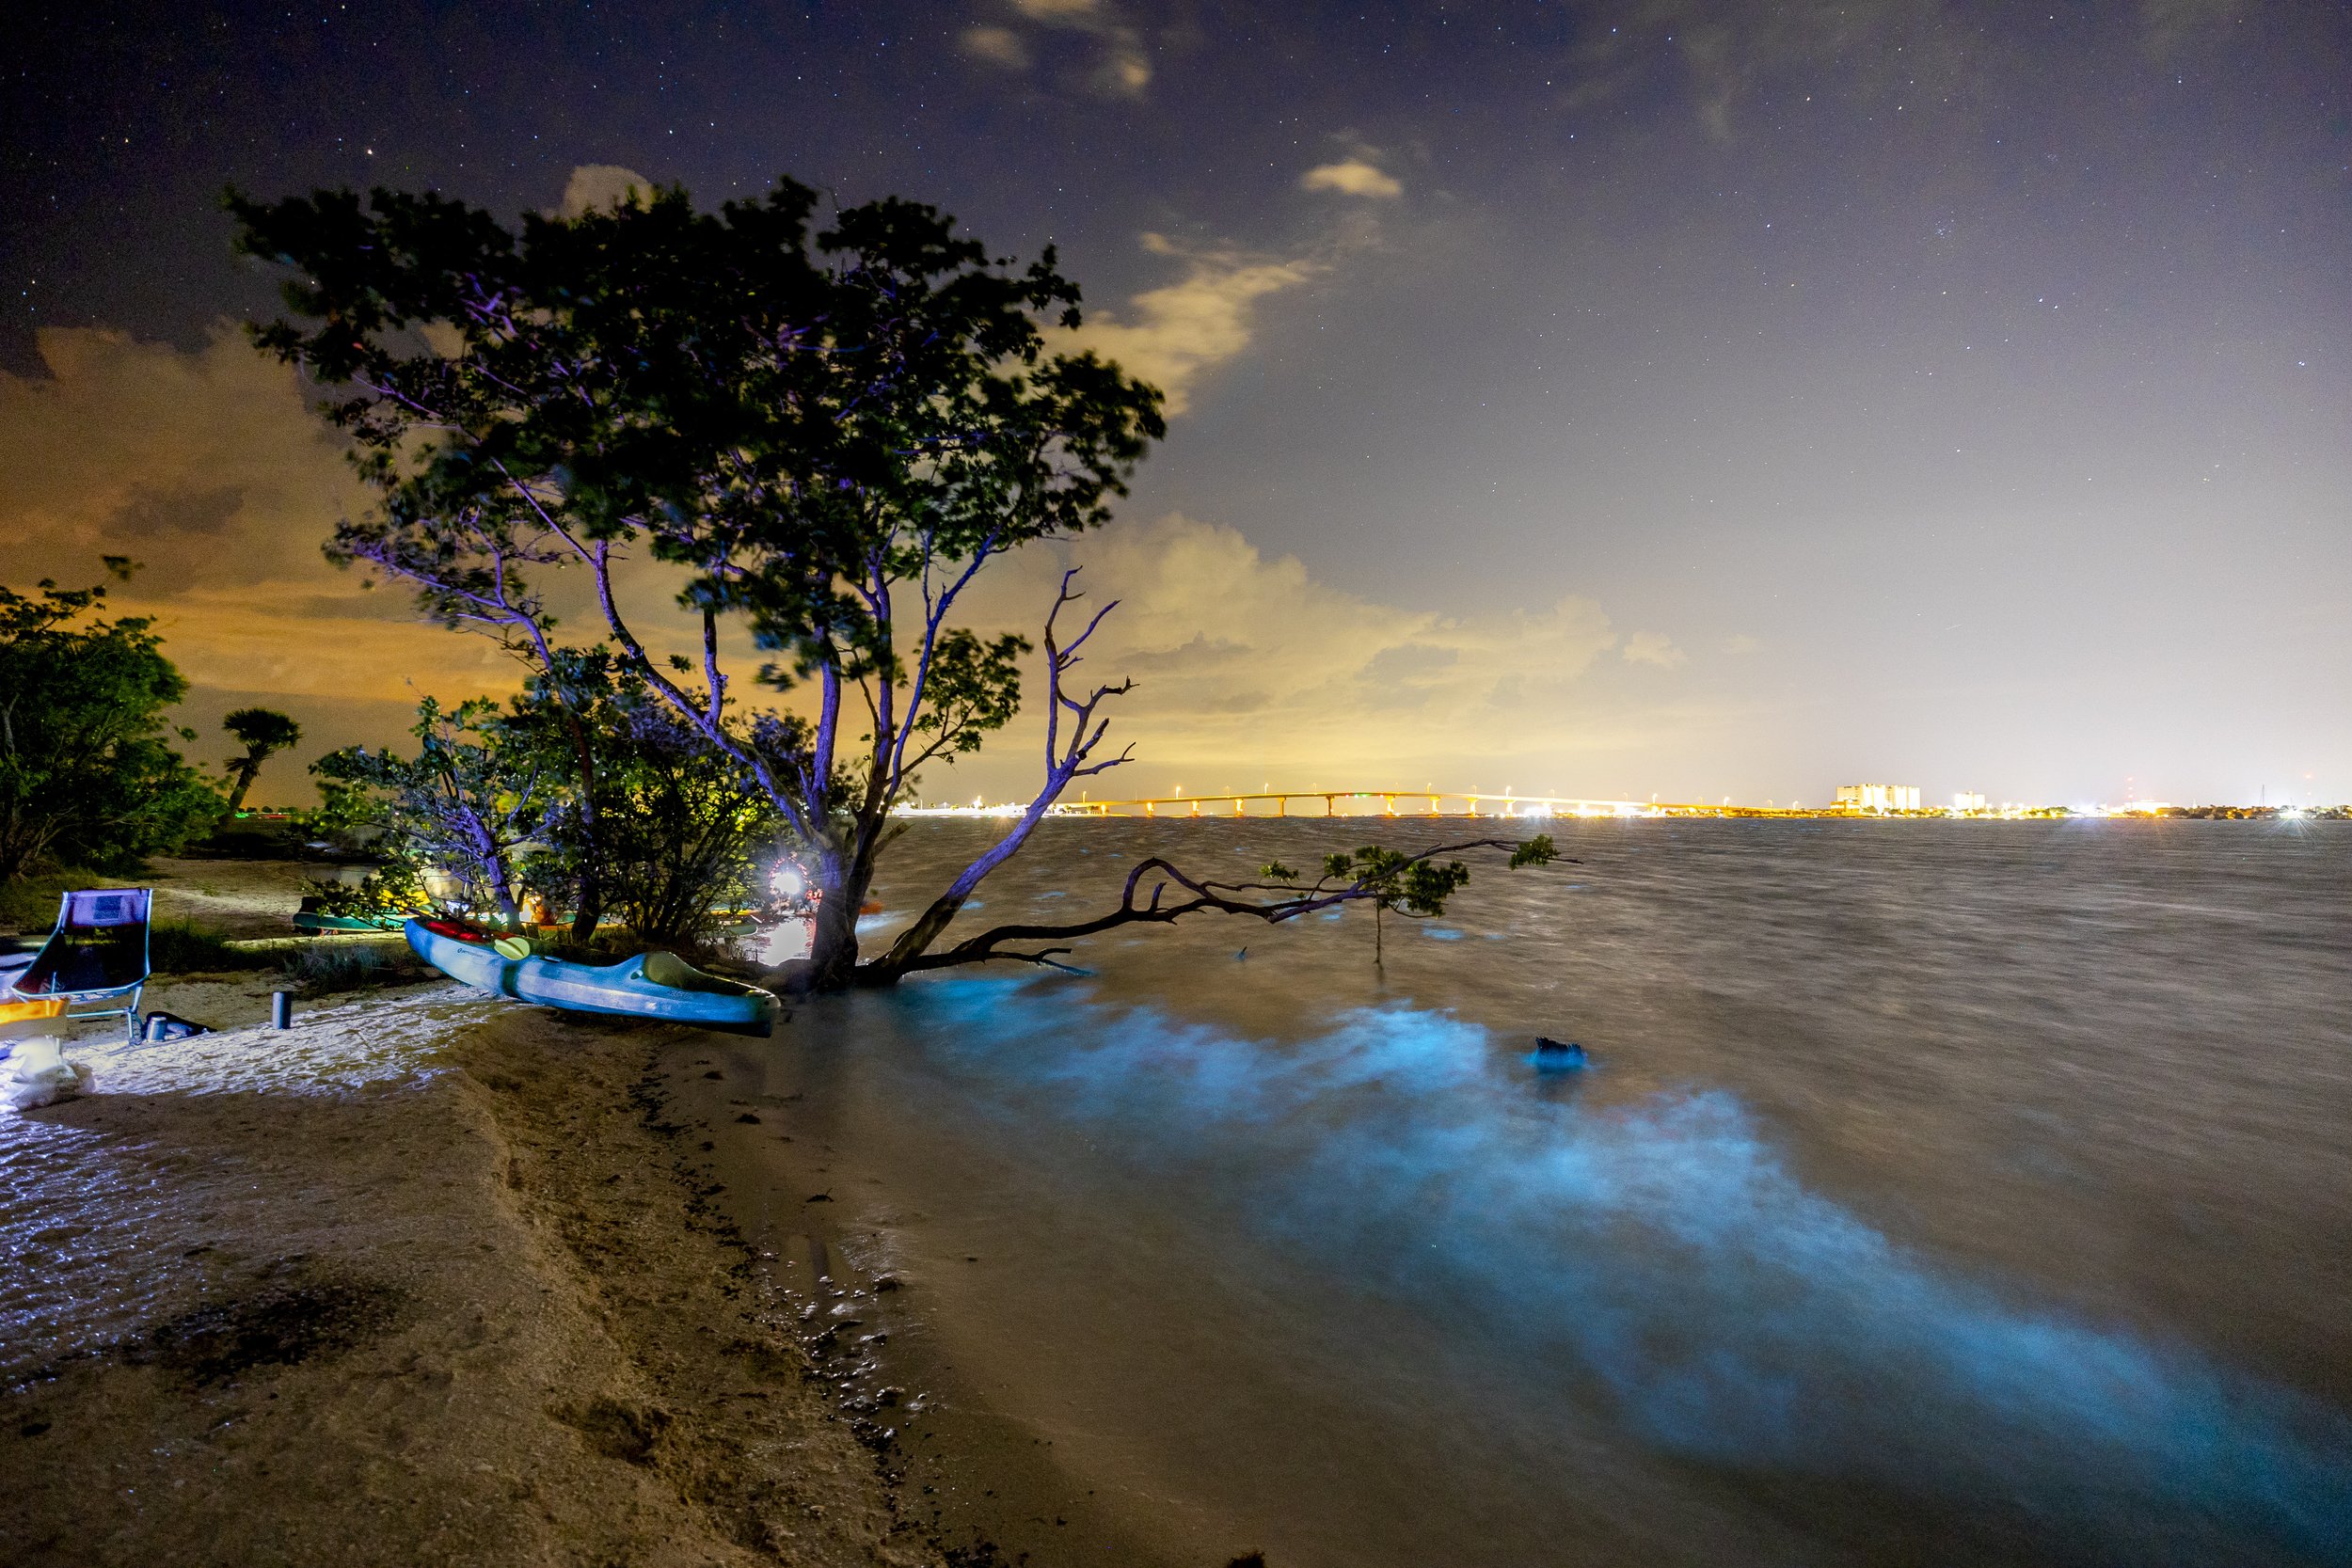  Bioluminescent dinoflagellates light up the Indian River Lagoon in Florida during the summertime. 